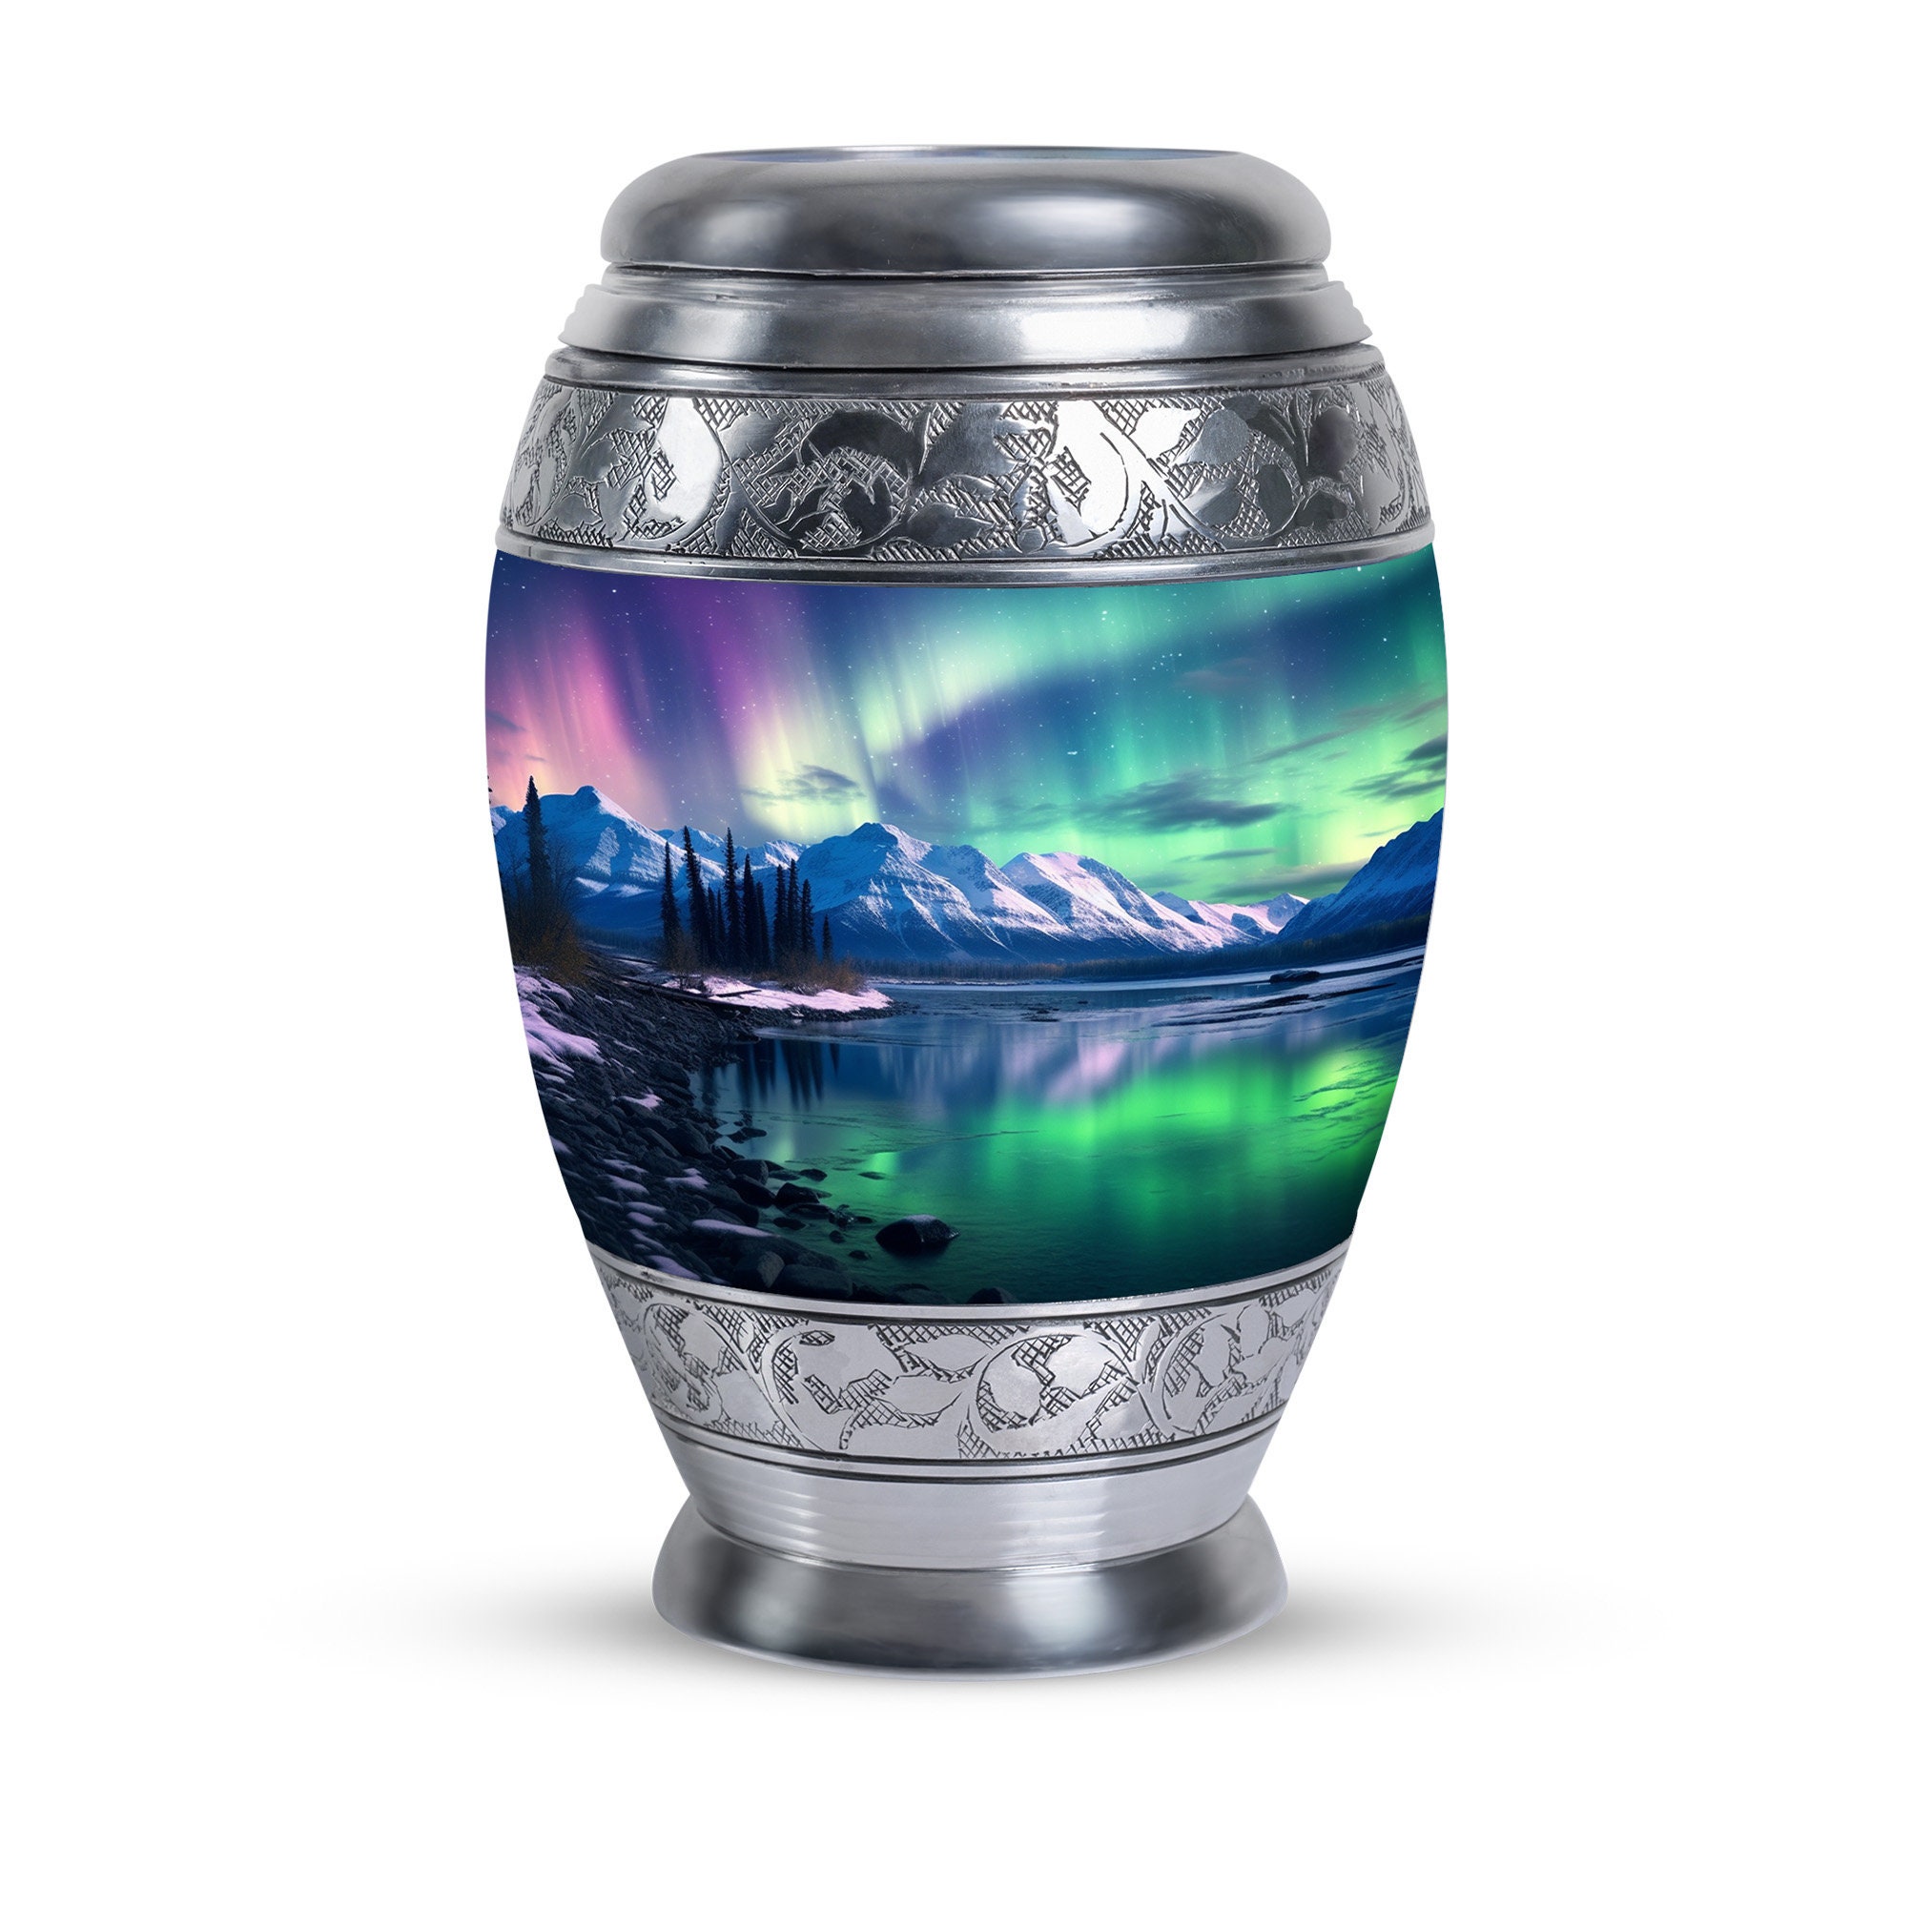 Aurora Borealis Cremation Urns for Human Ashes Northern Lights Cremation  Urns for Adults Urn Urns for Humans & Burial Urns for Ashes 